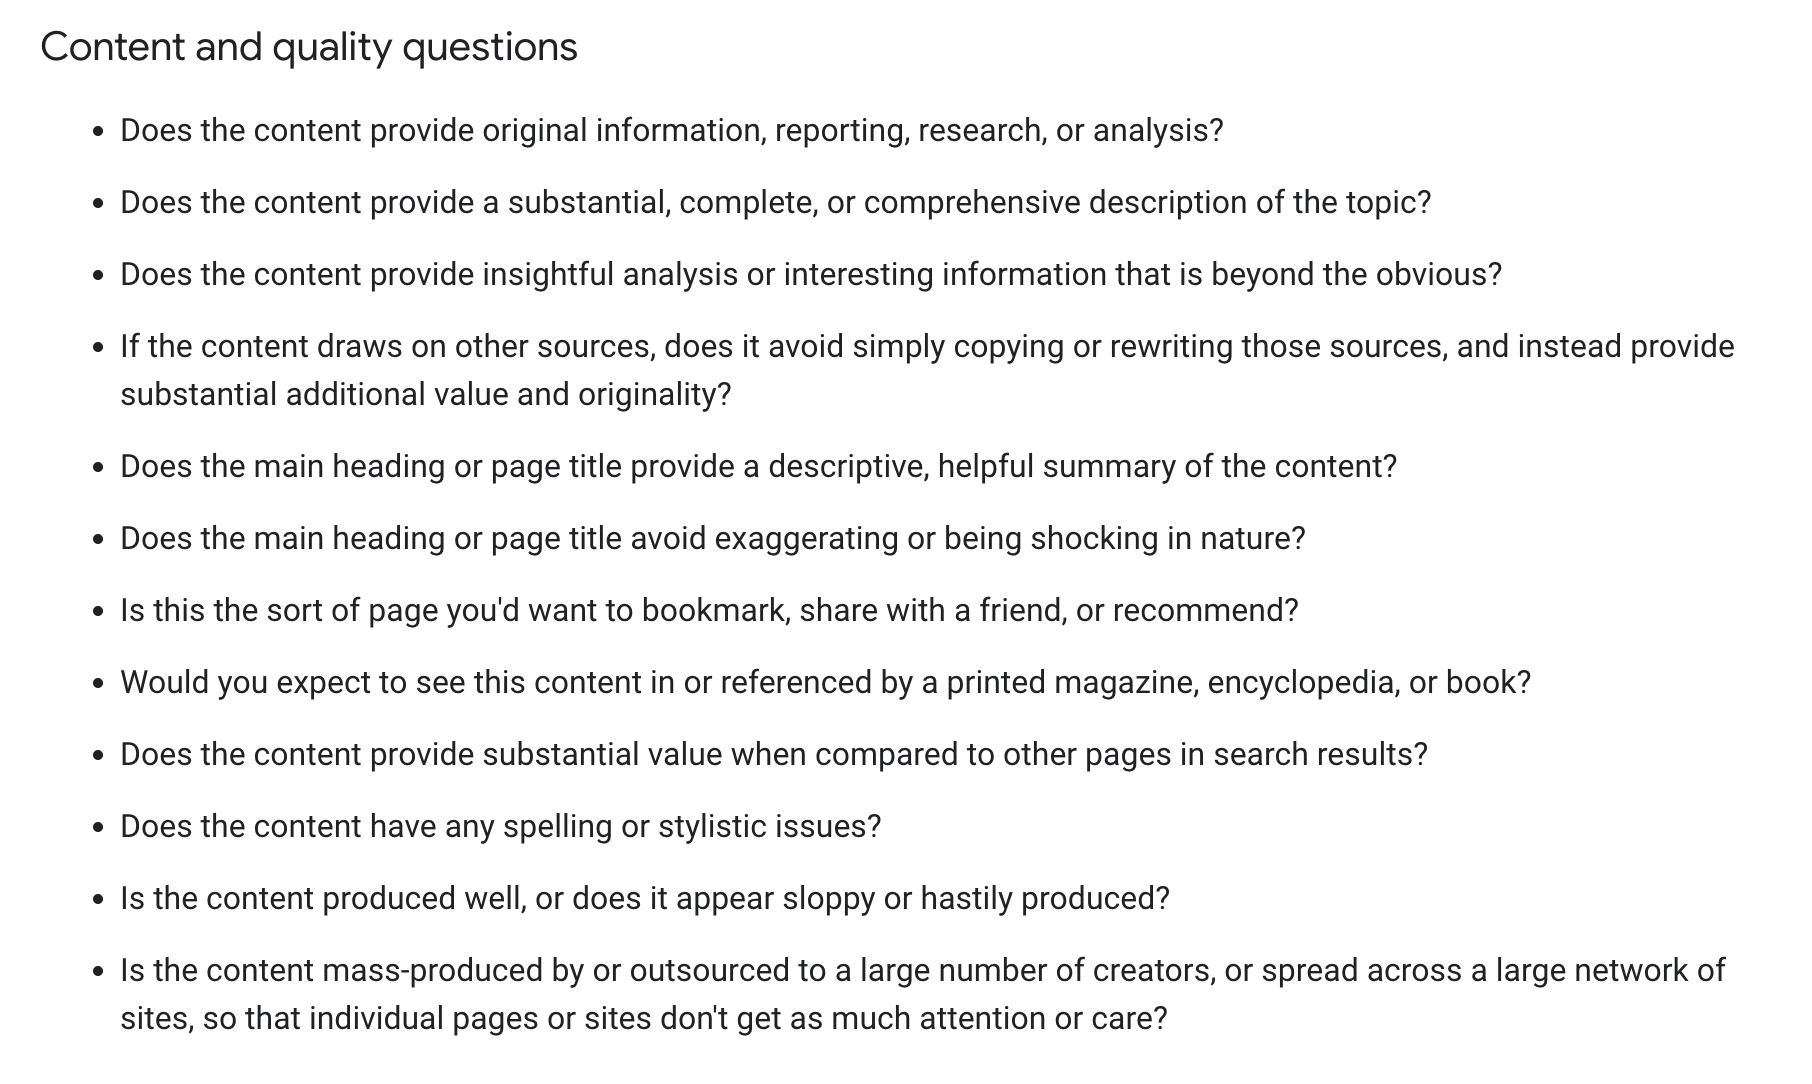 A screenshot of Google's Helpful Content guidelines